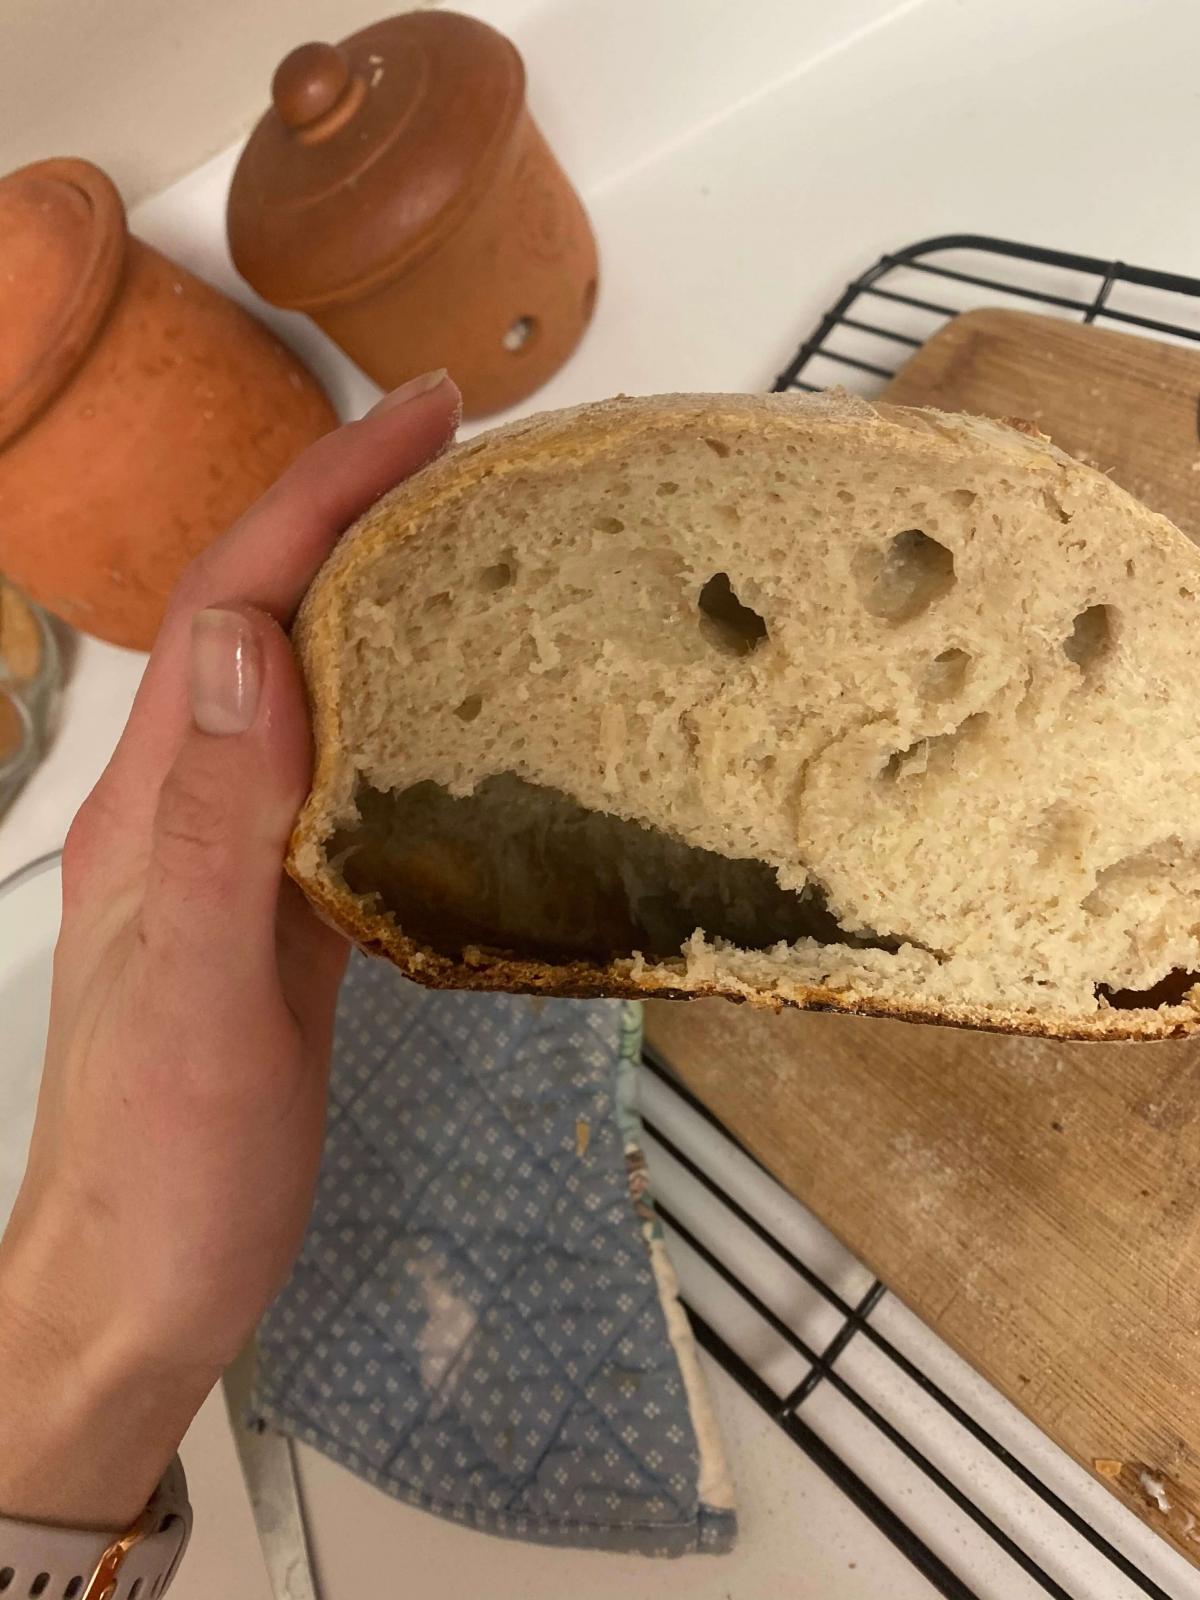 Giant holes in loaf :(